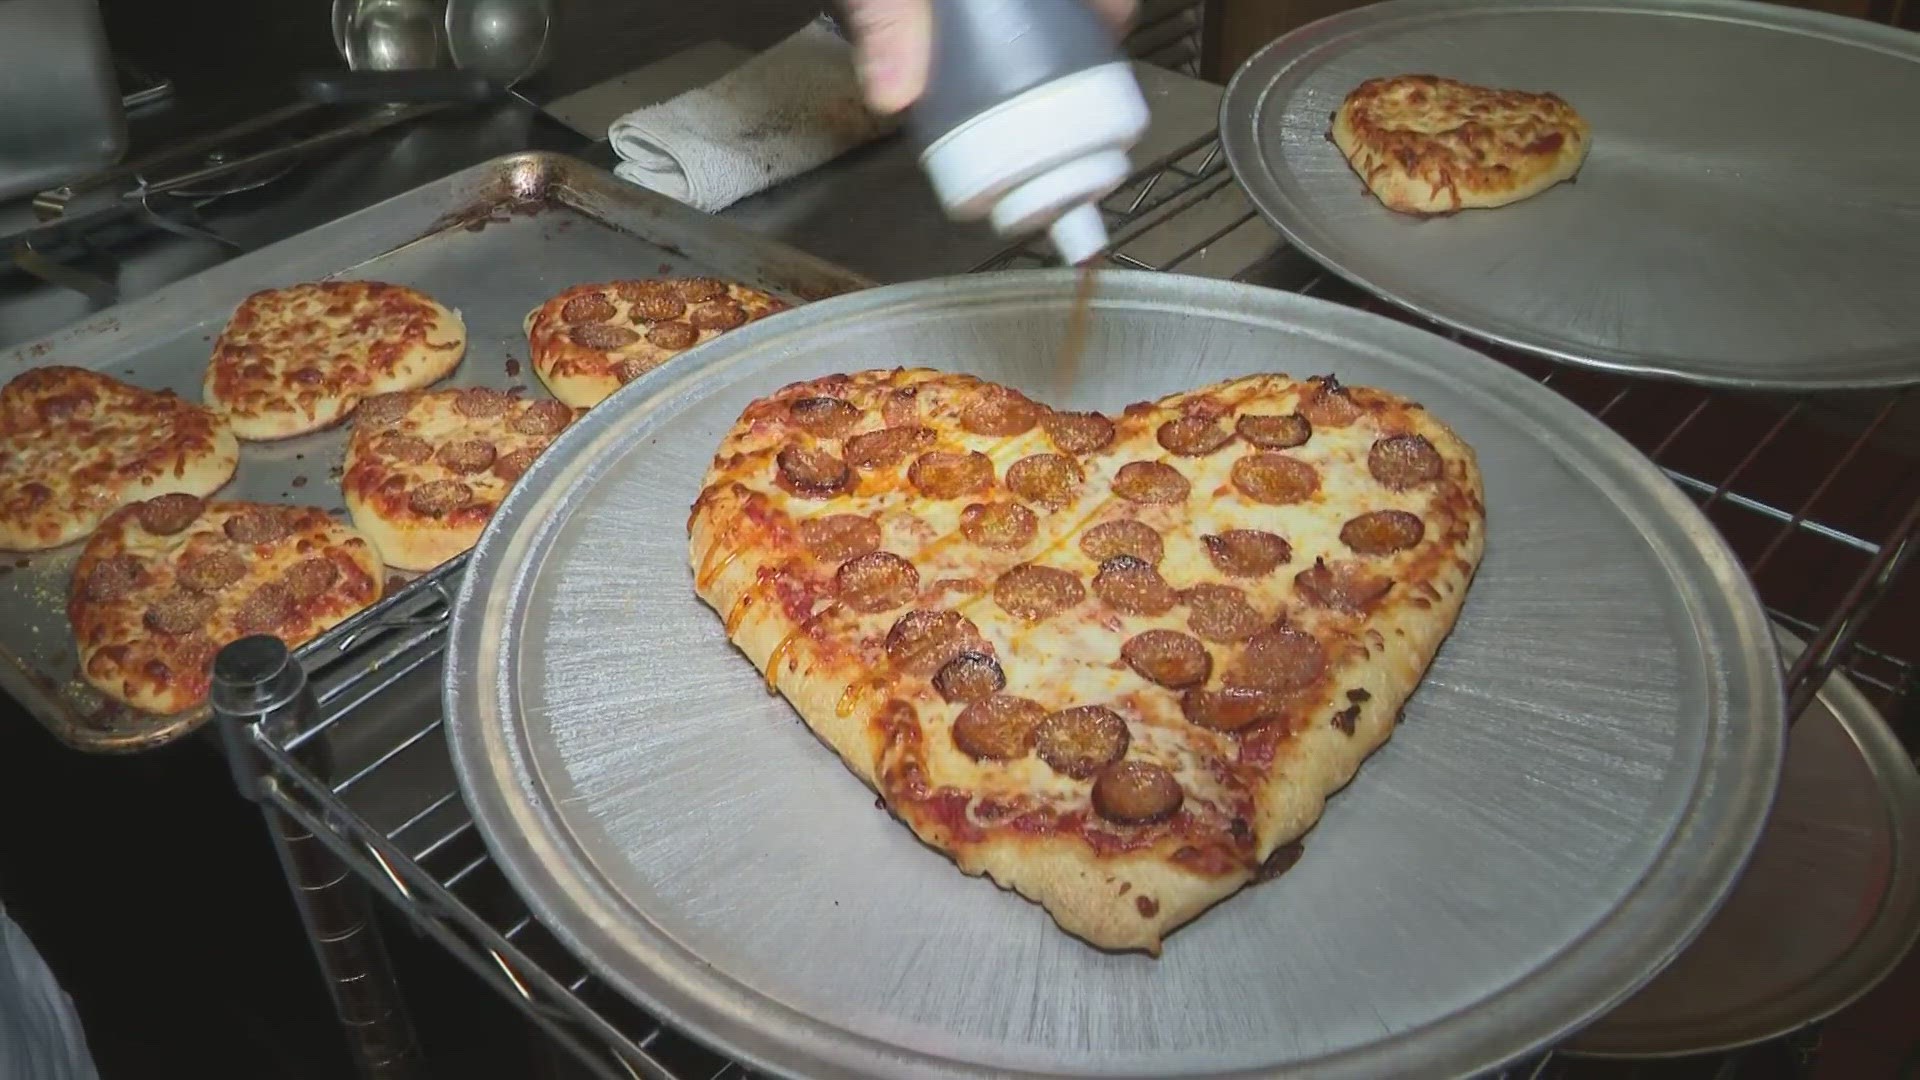 Who's hungry? Geraci's Slice Shop is serving up heart-shaped pizza for Valentine's Day.